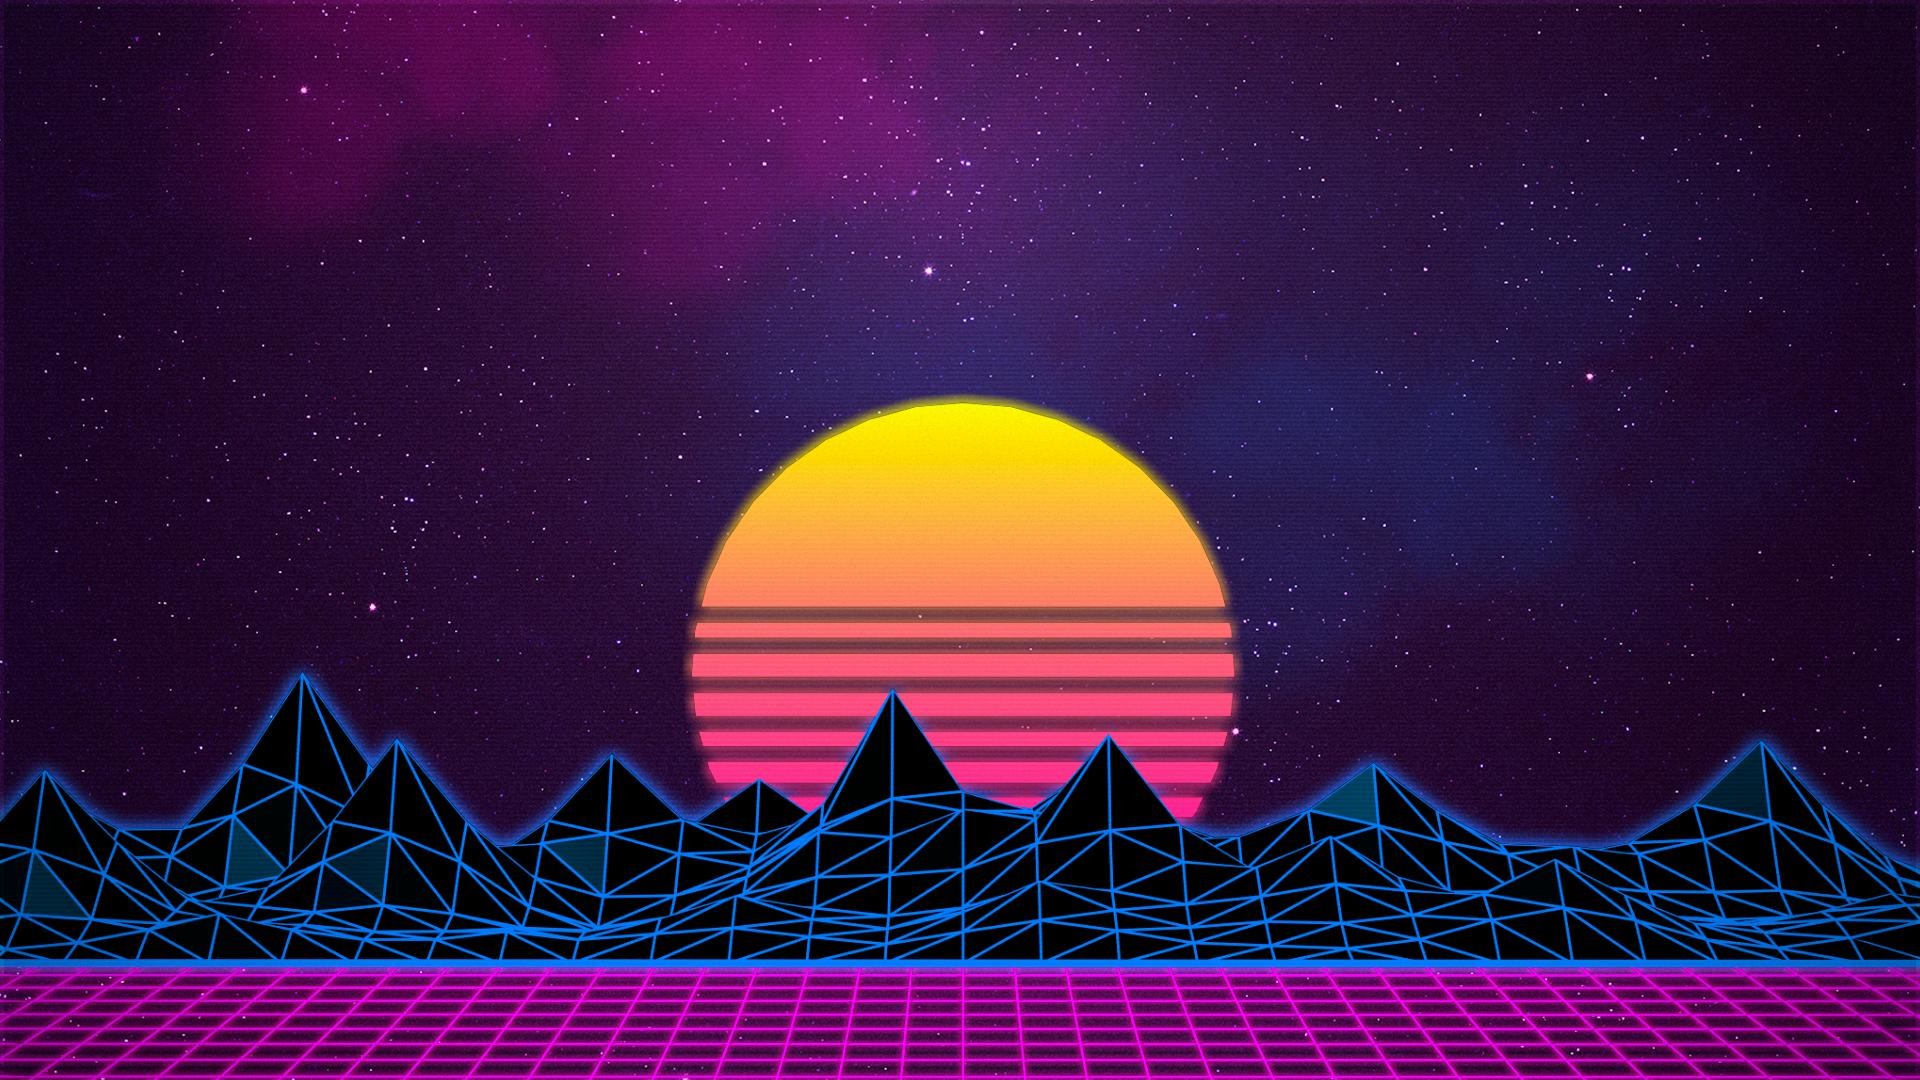 1920x1080 Looks a lot like this wallpaper.